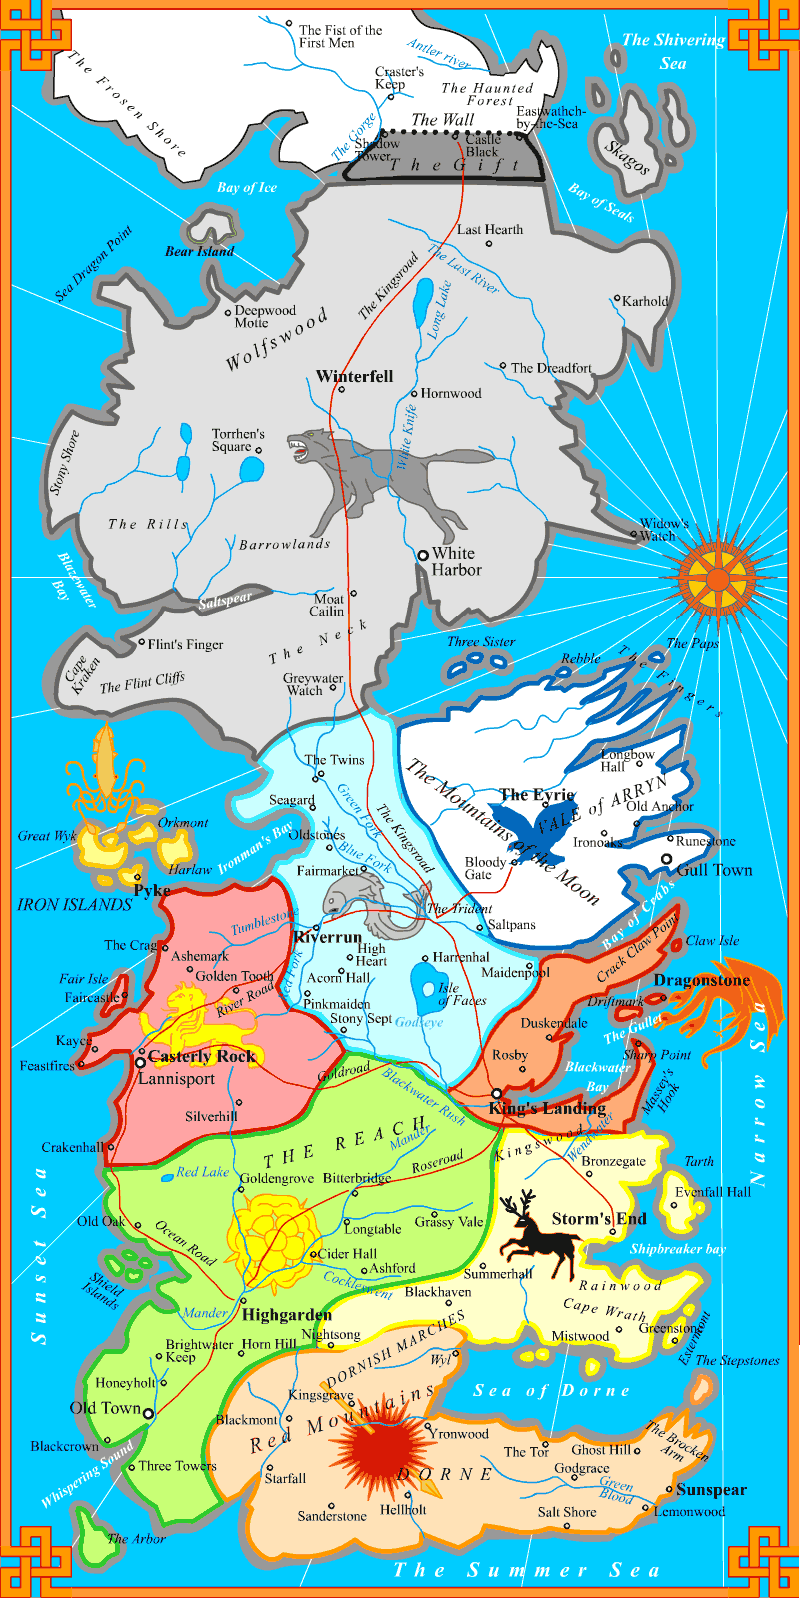 Map of Westeros - Political